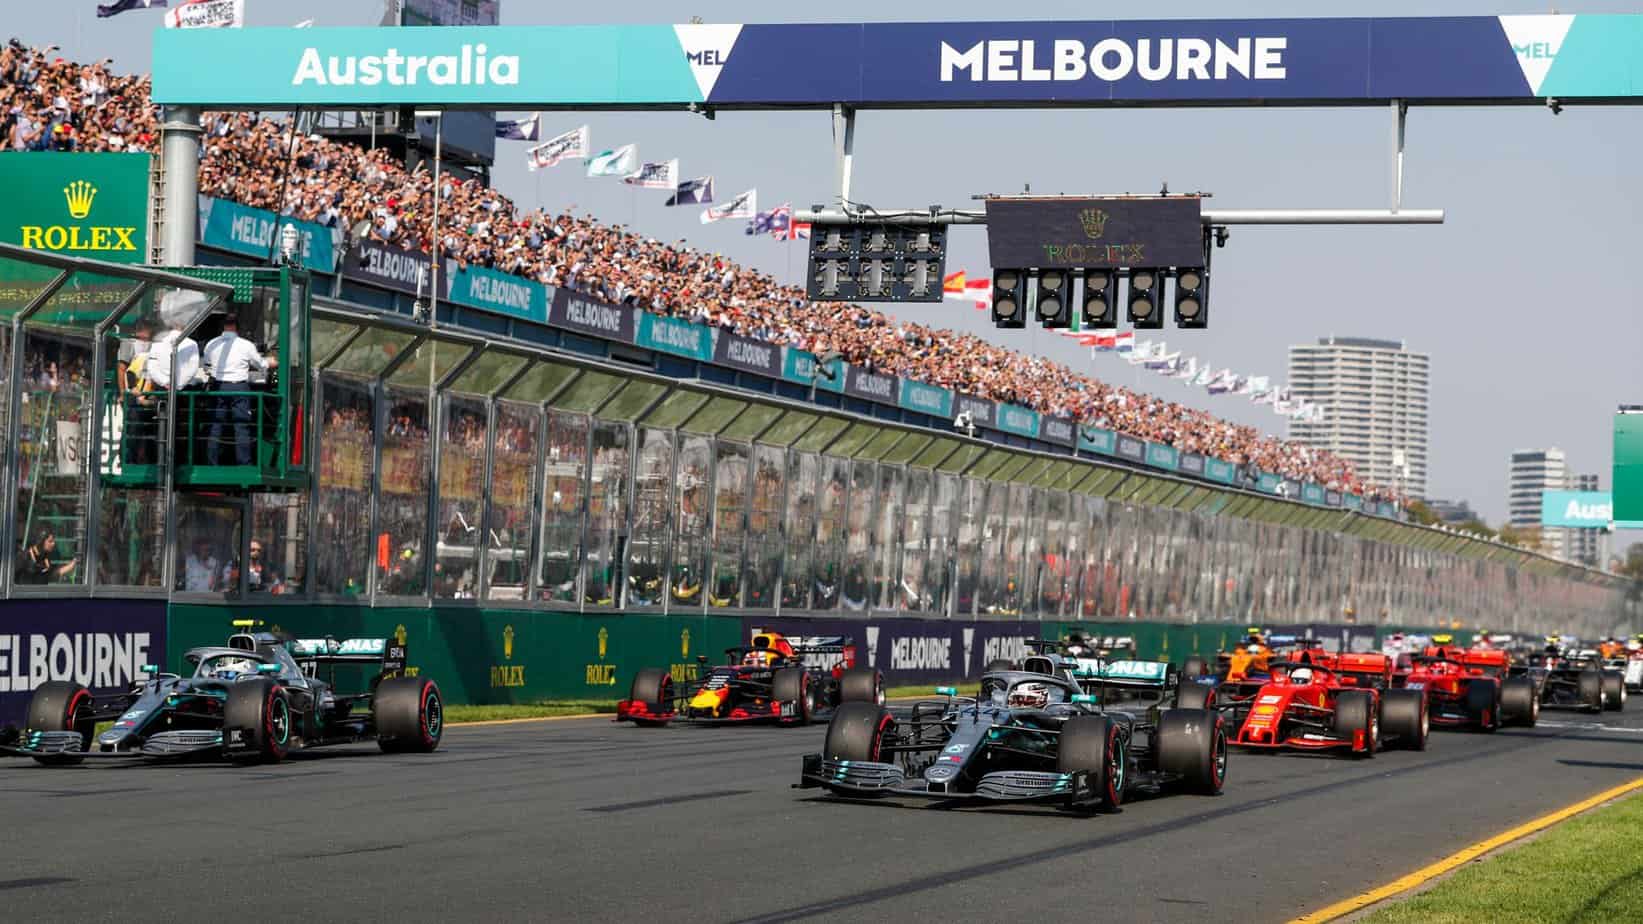 Australian GP Preview and Betting Odds